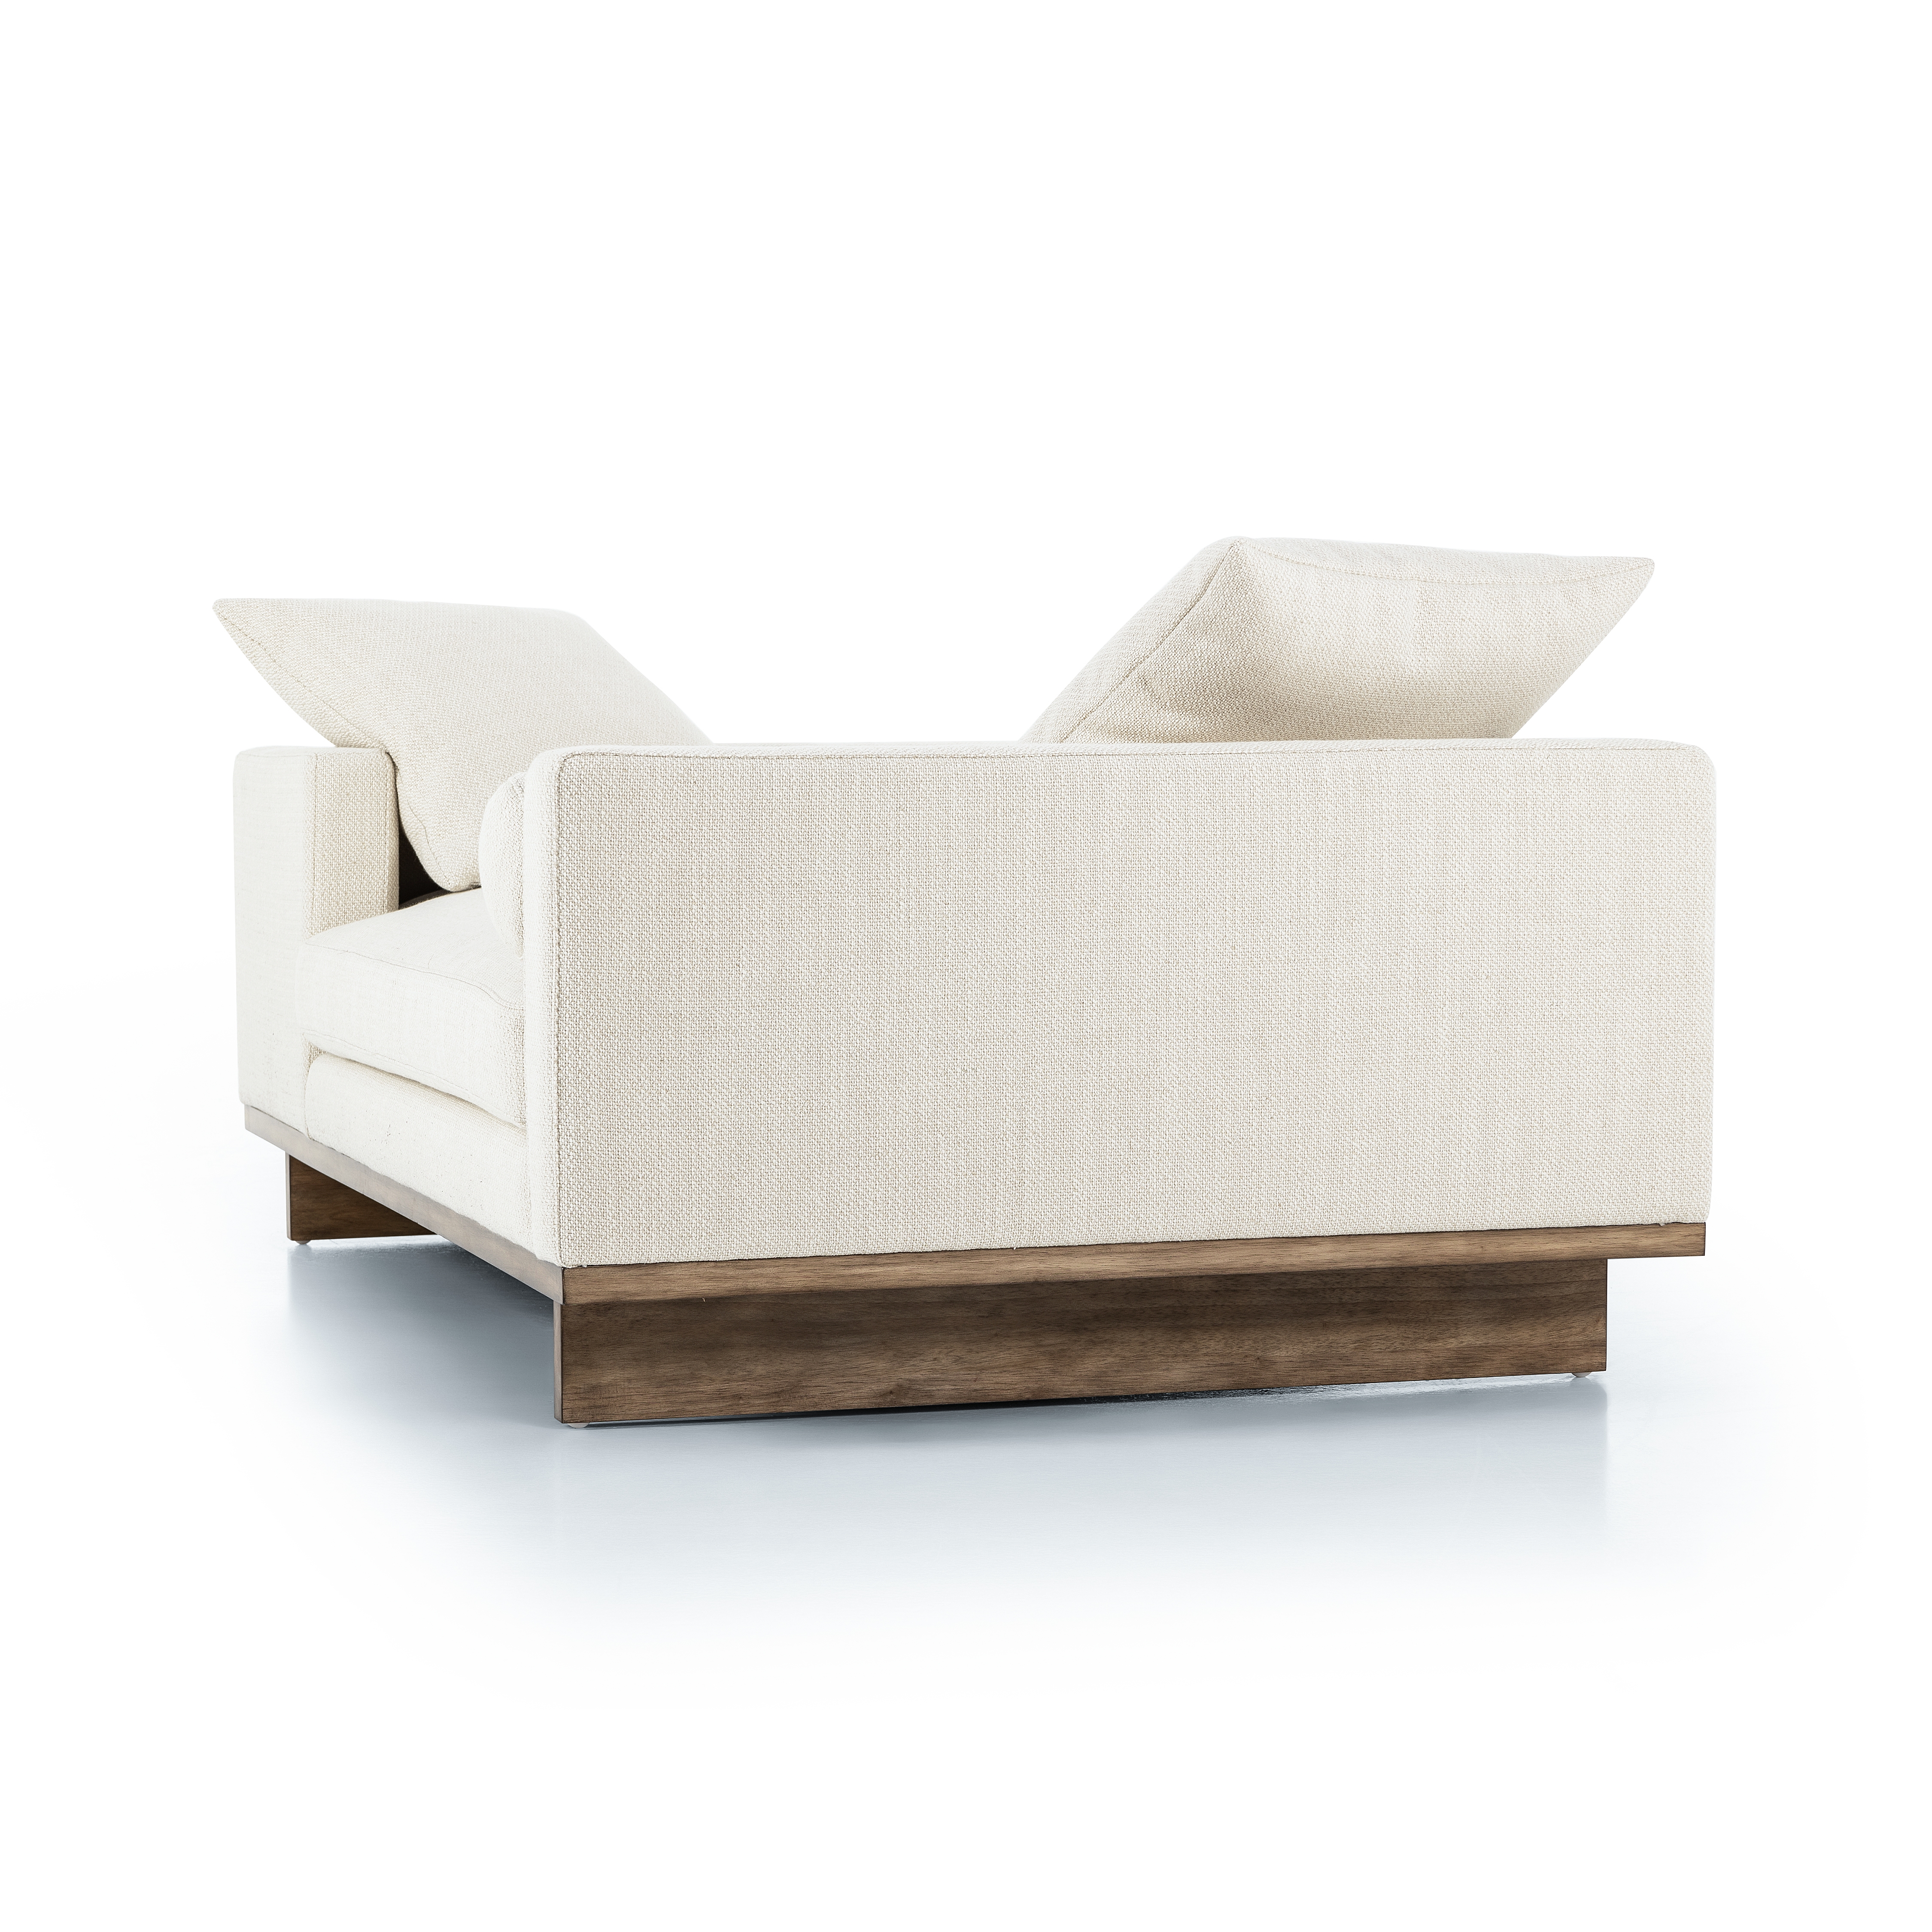 Everly Tete A Tete Chaise-Irving Taupe - Image 2